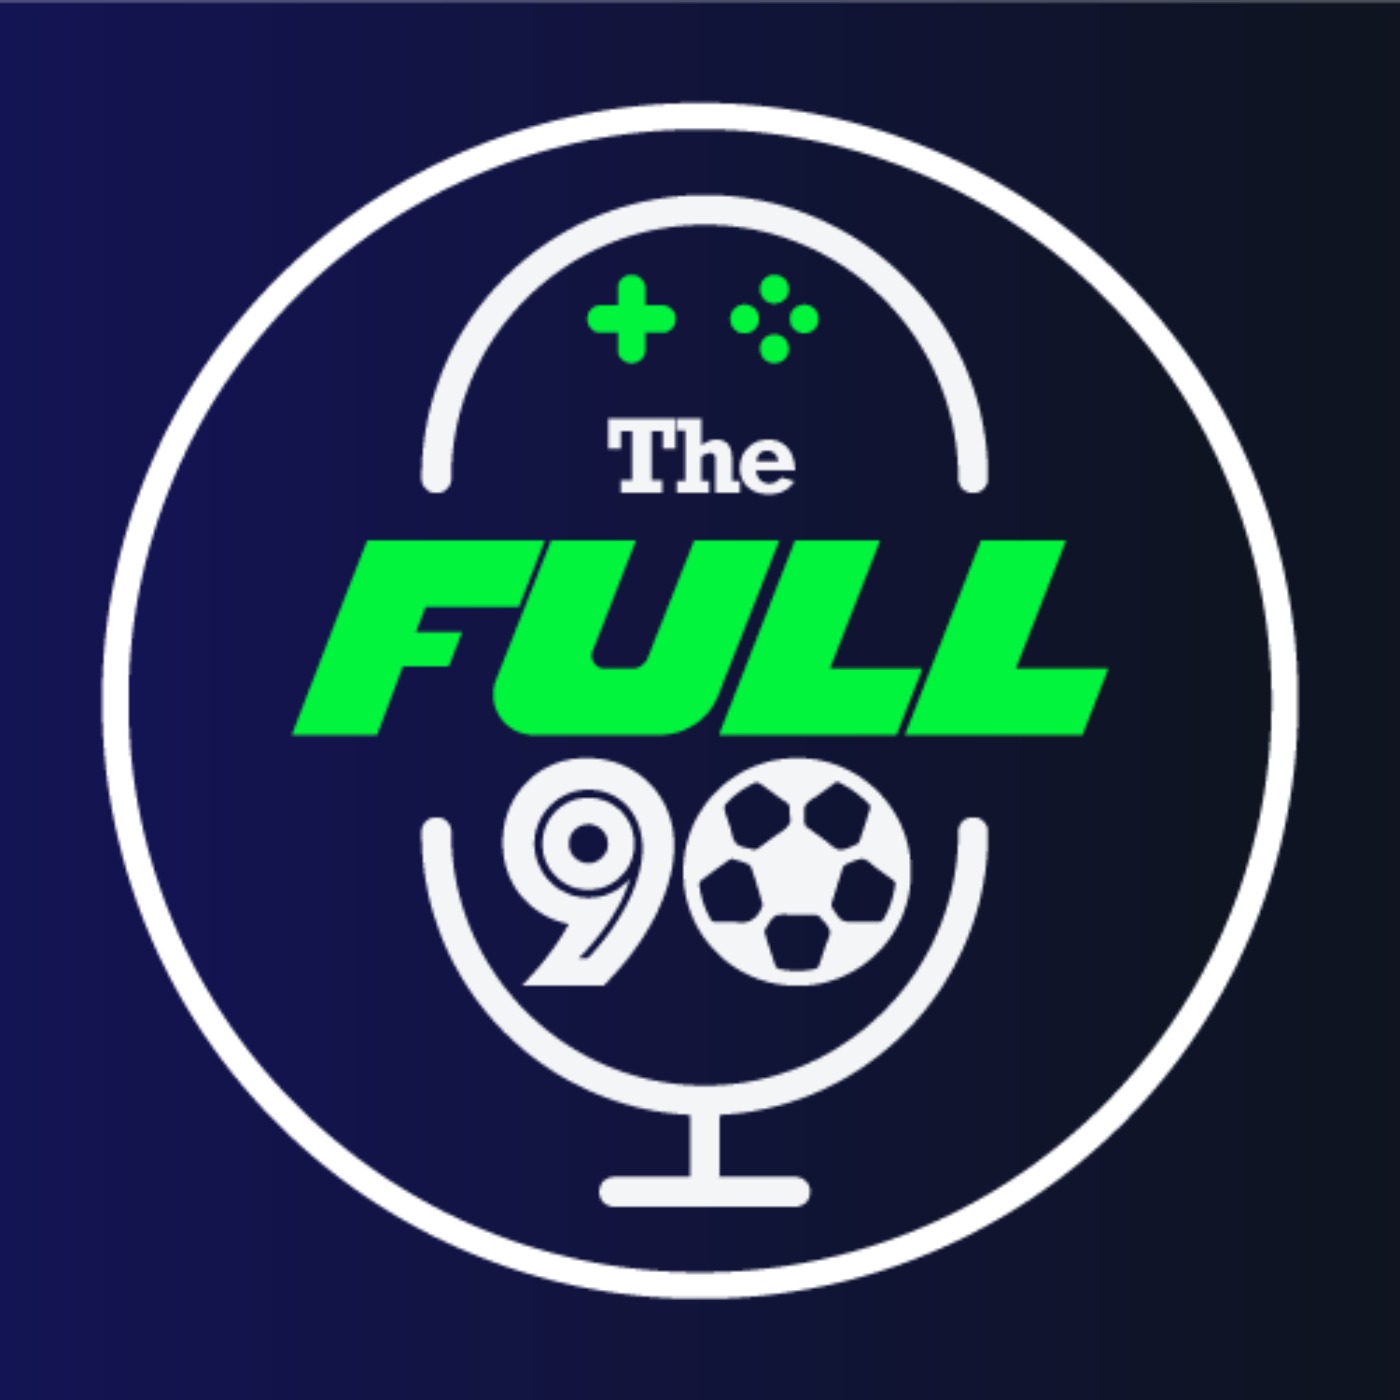 Nepenthez - The FULL Story. The Full 90 Podcast # 1